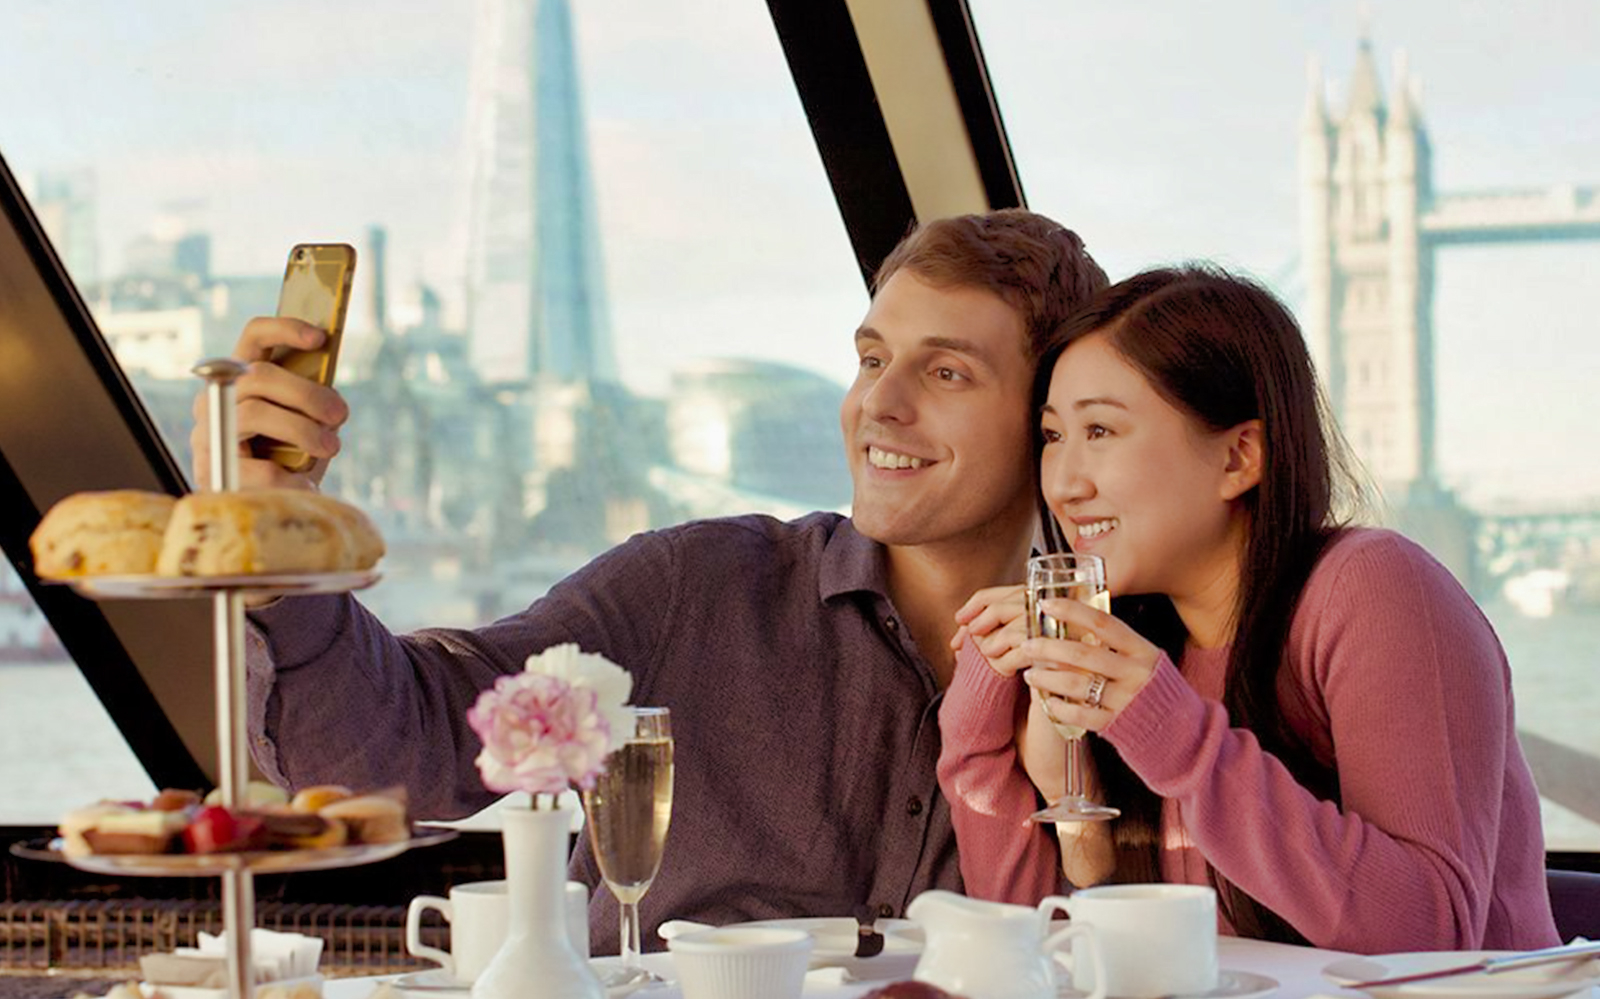 Image of Thames Afternoon Tea Cruise